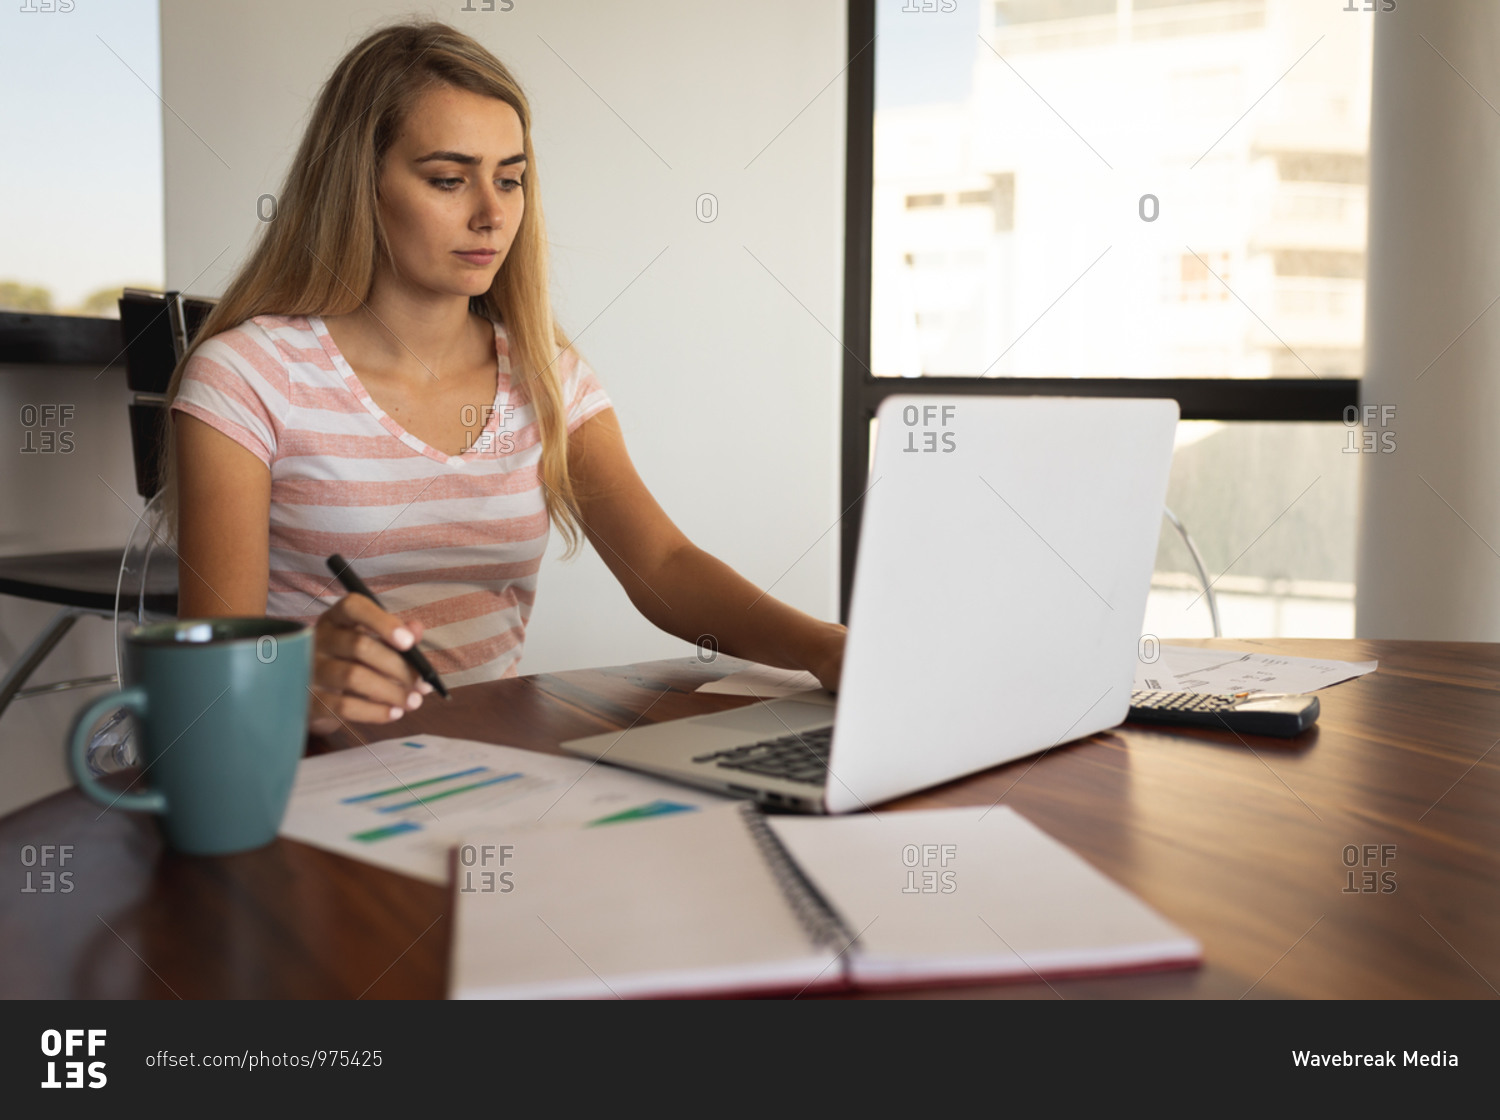 Caucasian woman sitting by a table, using a laptop and writing on a sheet of paper. Social distancing and self isolation in quarantine lockdown.